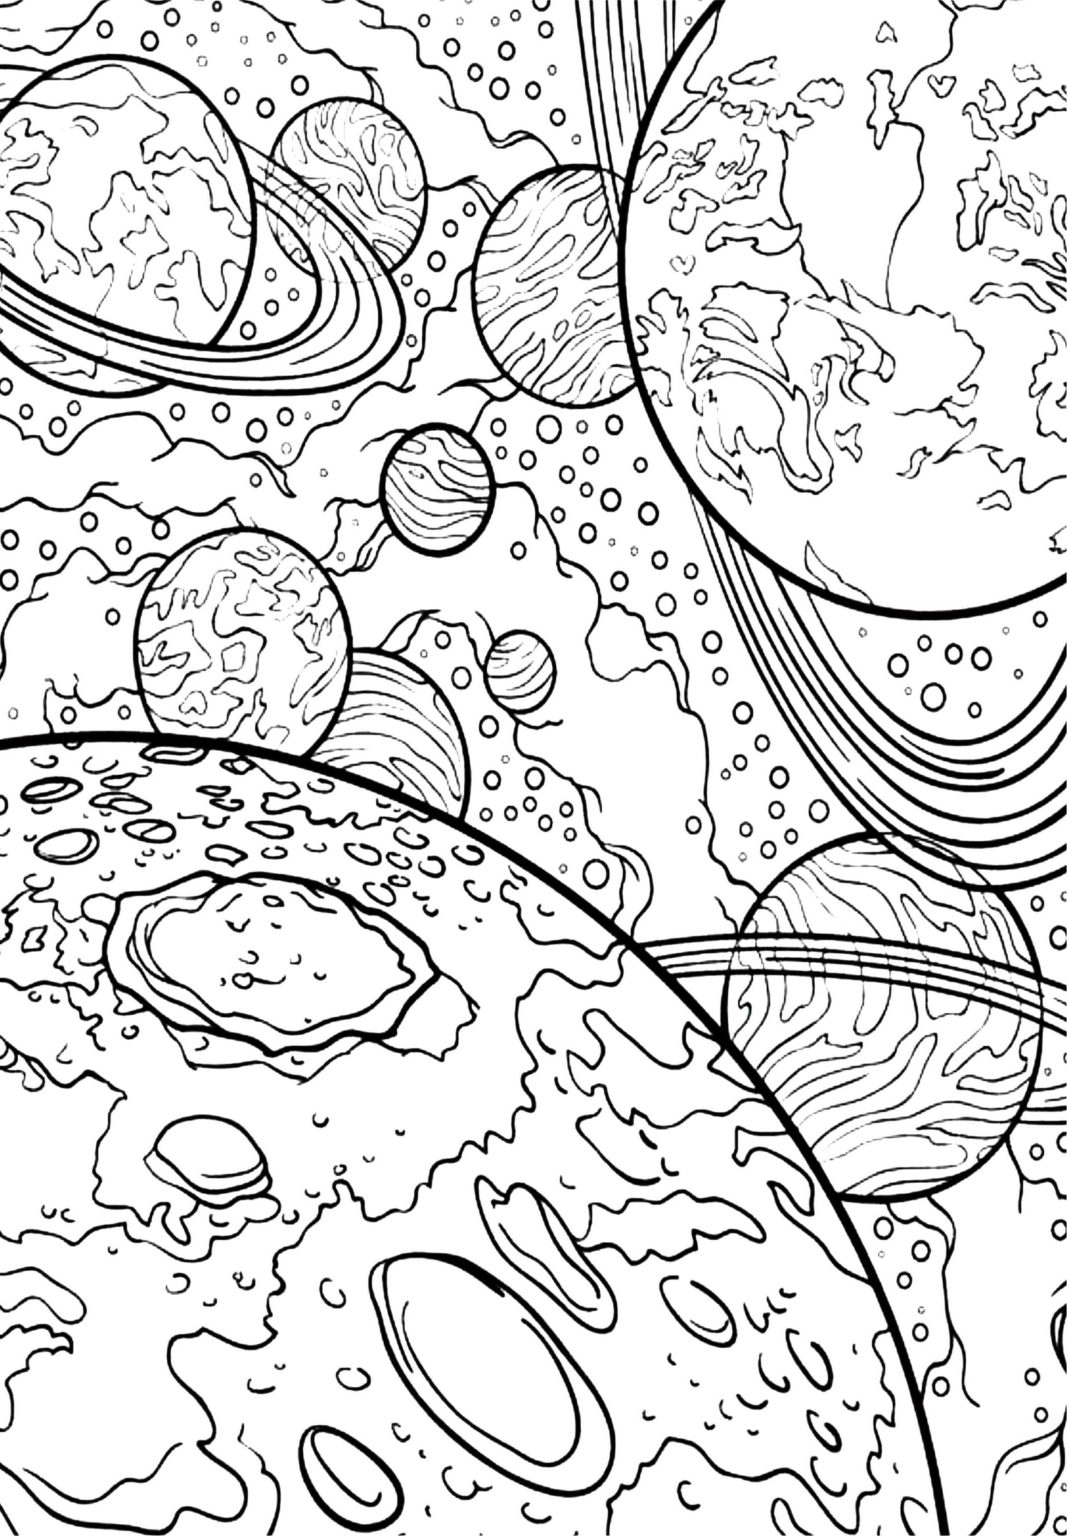 planets-coloring-pages-100-pieces-print-free-for-kids